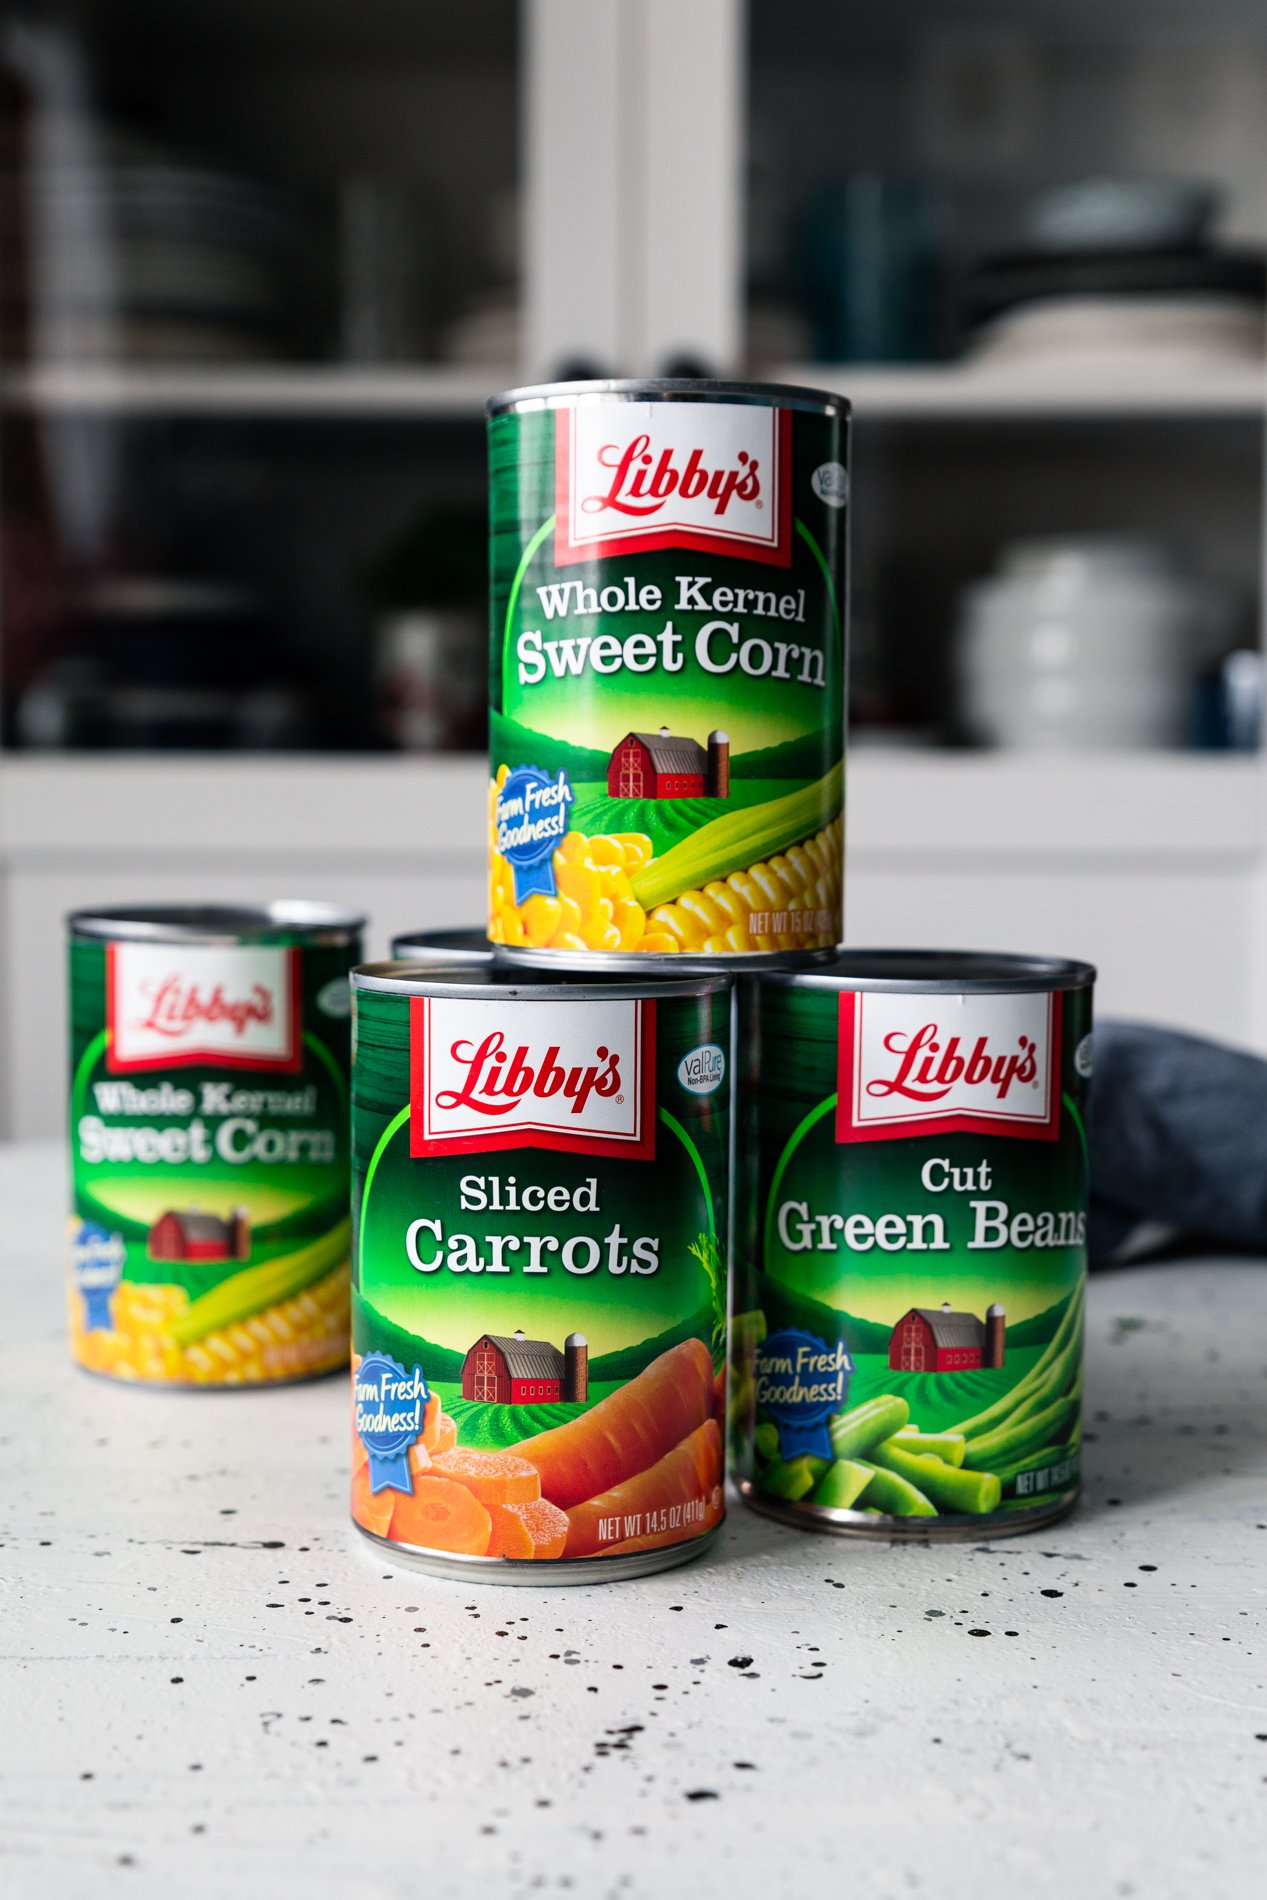 straight forward view of cans of Libby's corn, carrots, and green beans.